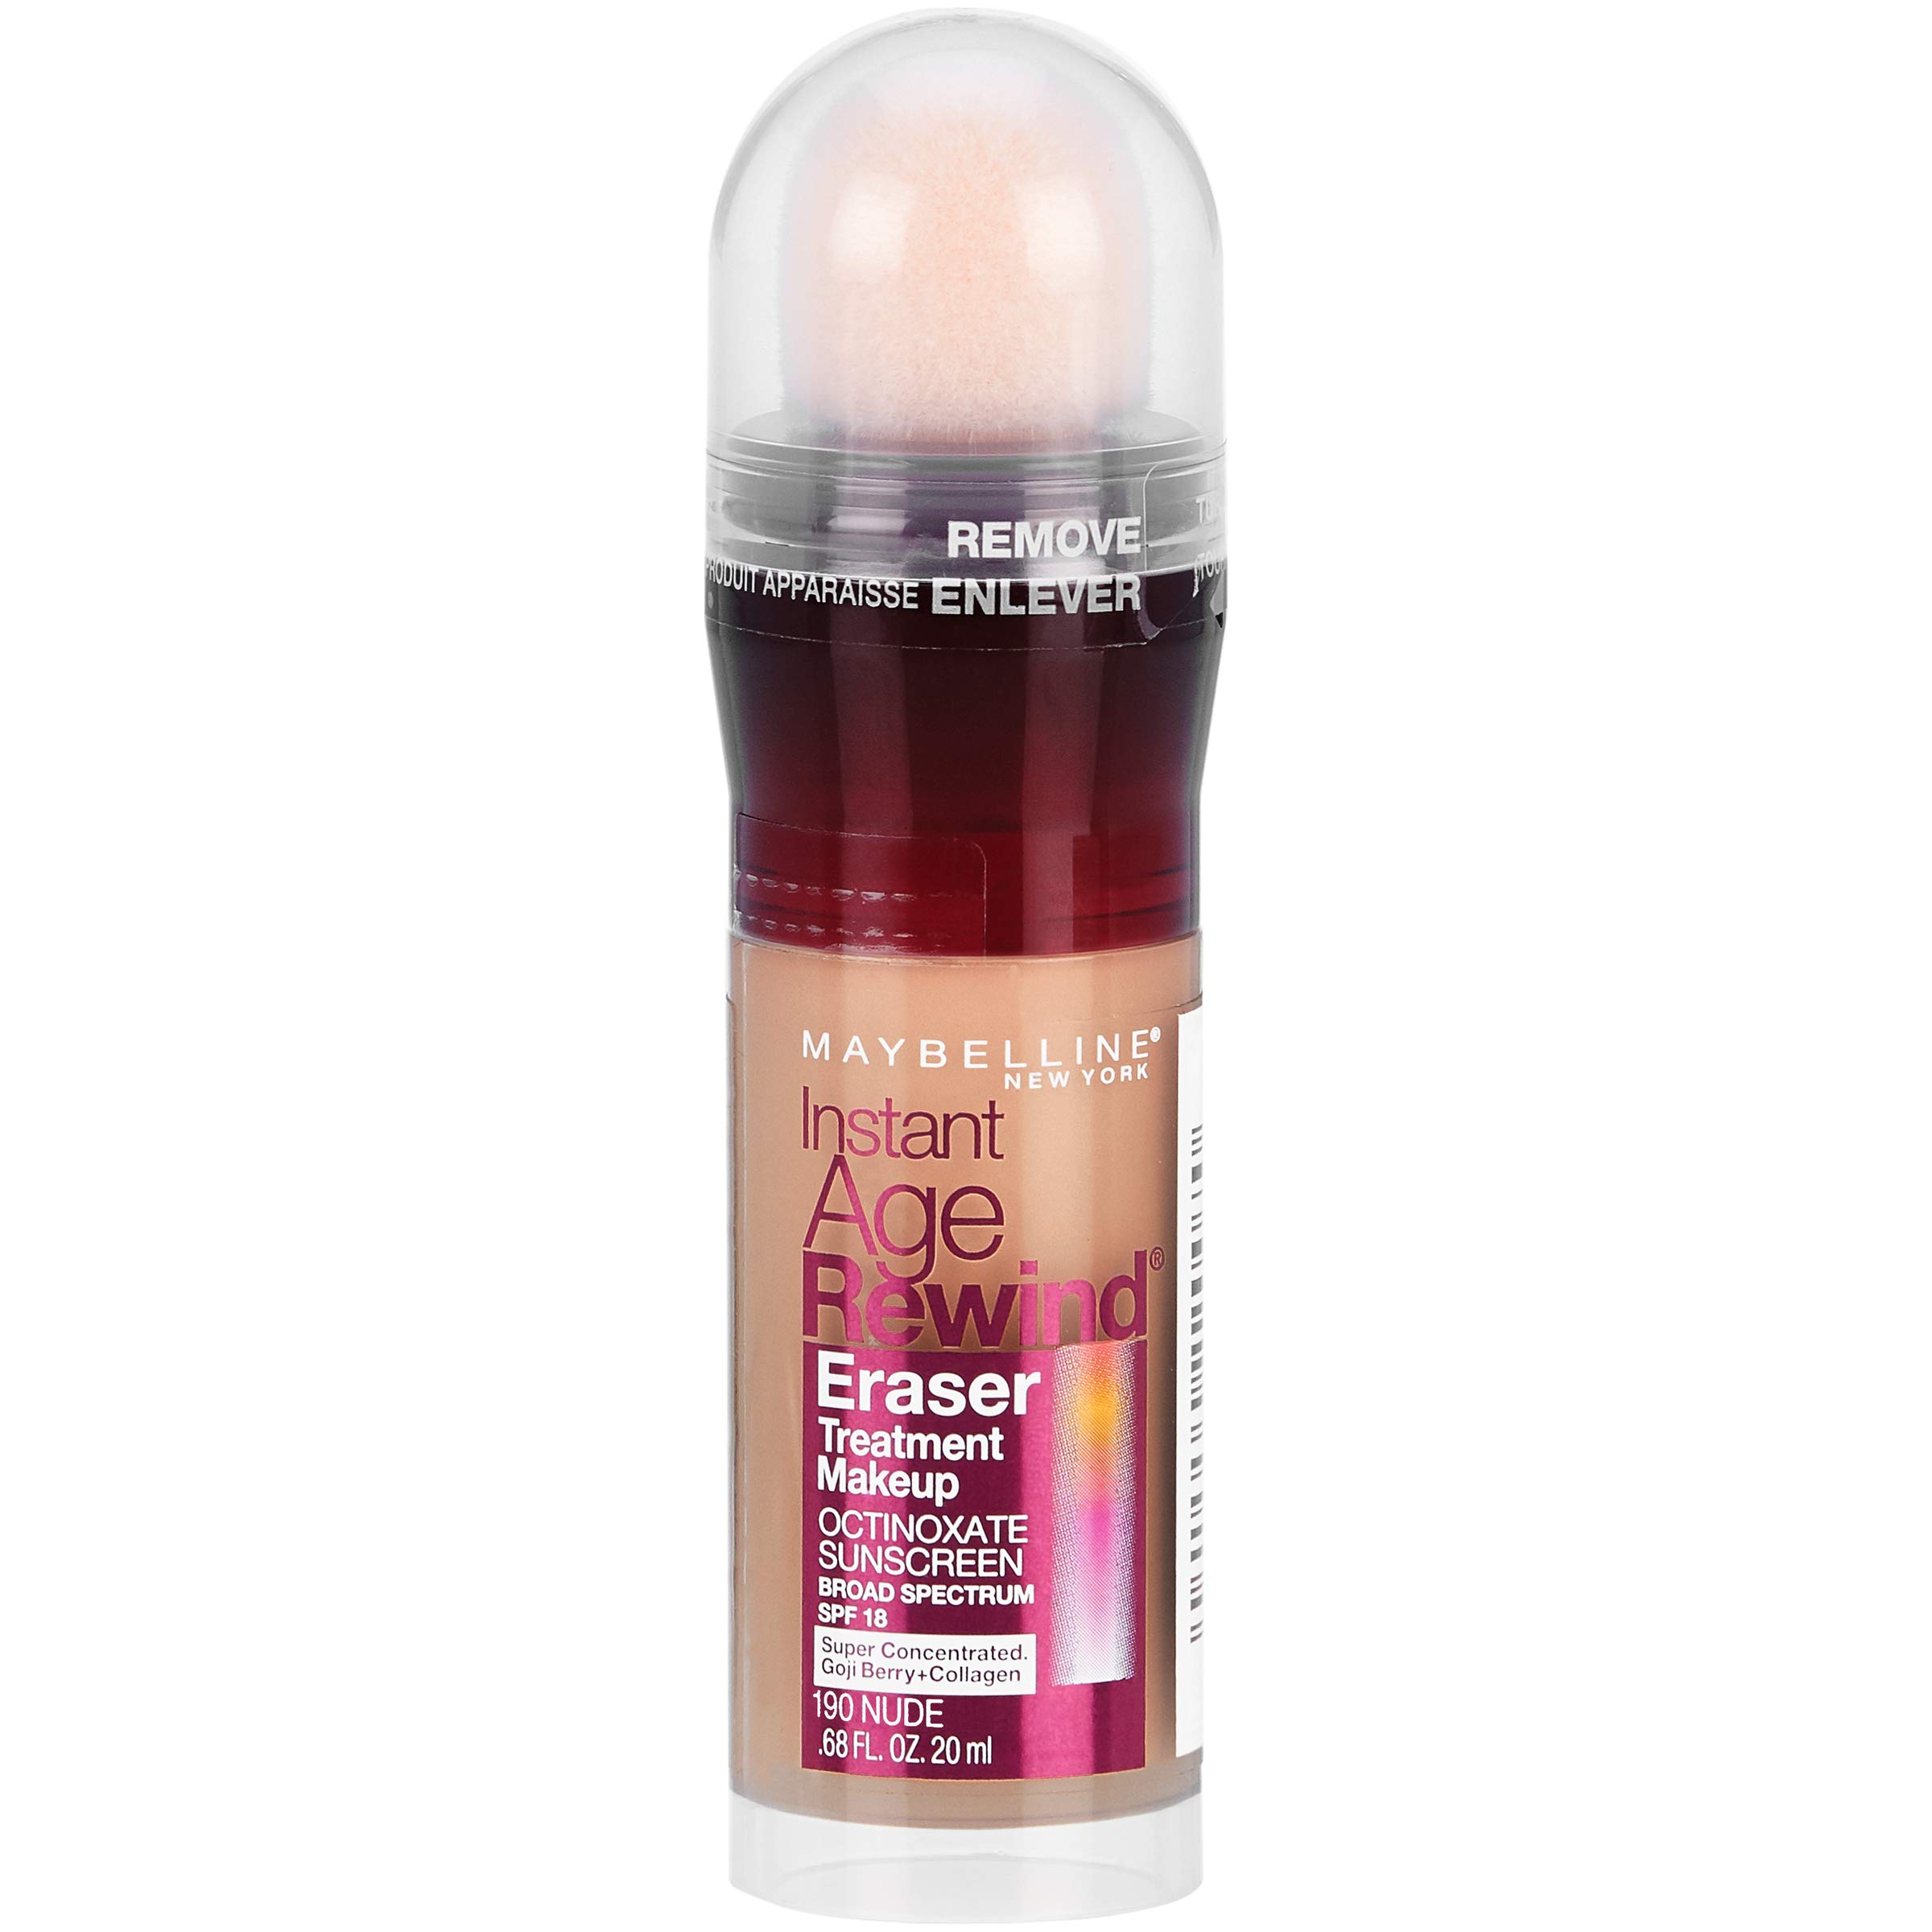 Maybelline New York Instant Age Rewind Eraser Treatment Makeup with SPF 18, Anti Aging Concealer Infused with Goji Berry and Collagen, Nude, 1 Count